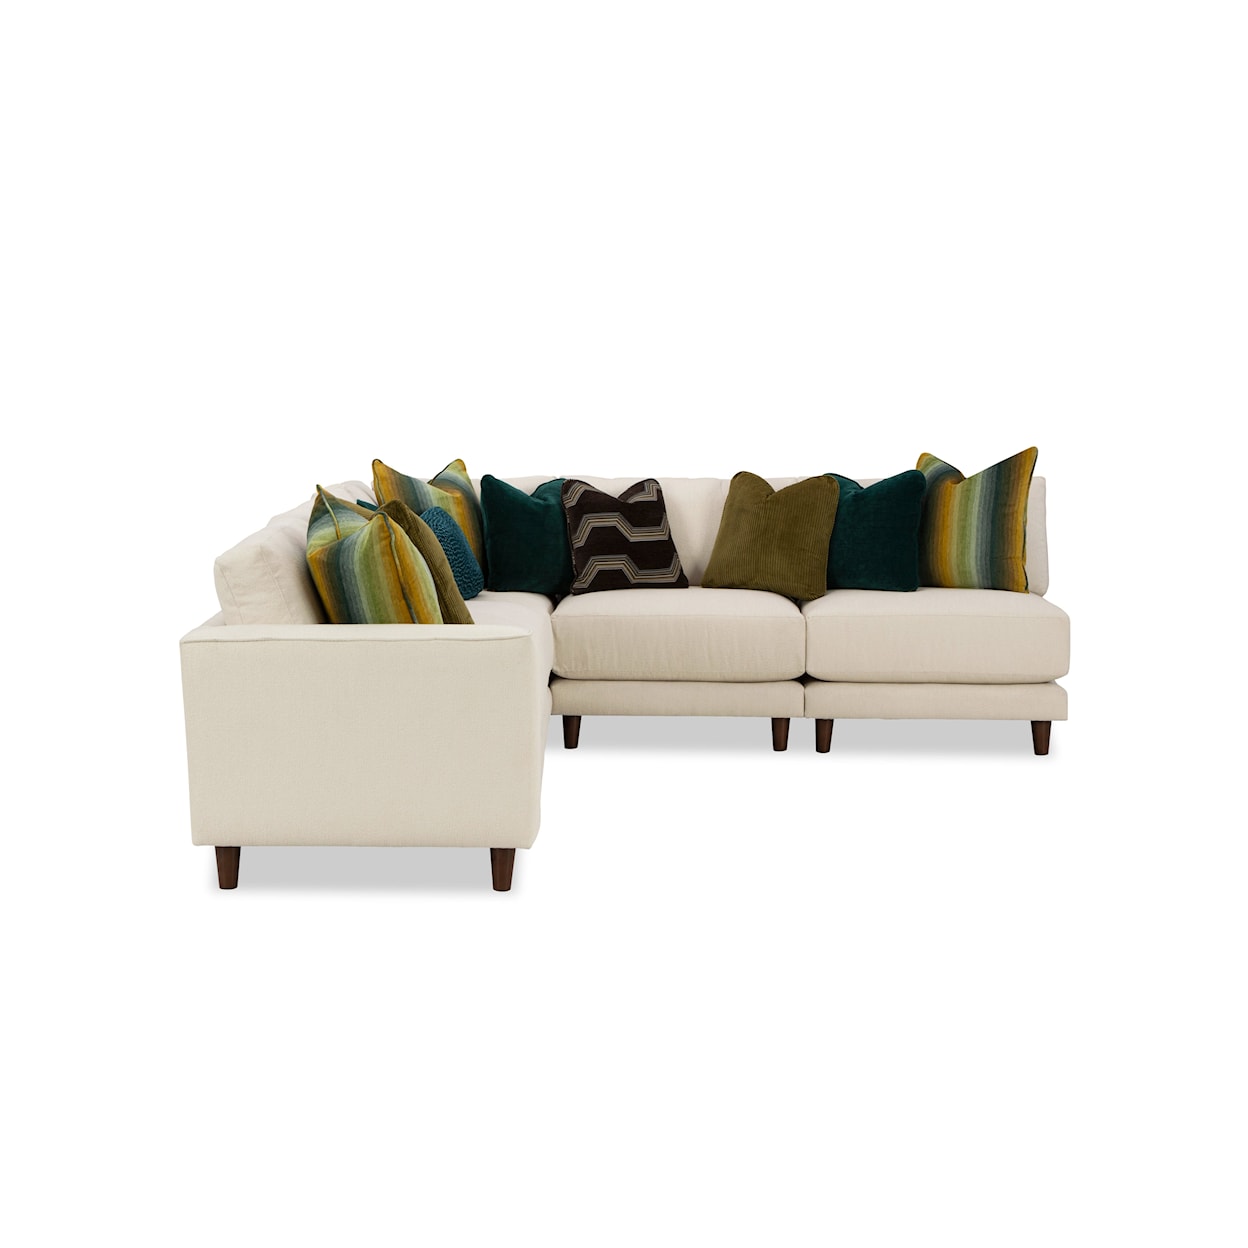 Hickory Craft 735200BD 4-Seat Sectional Sofa